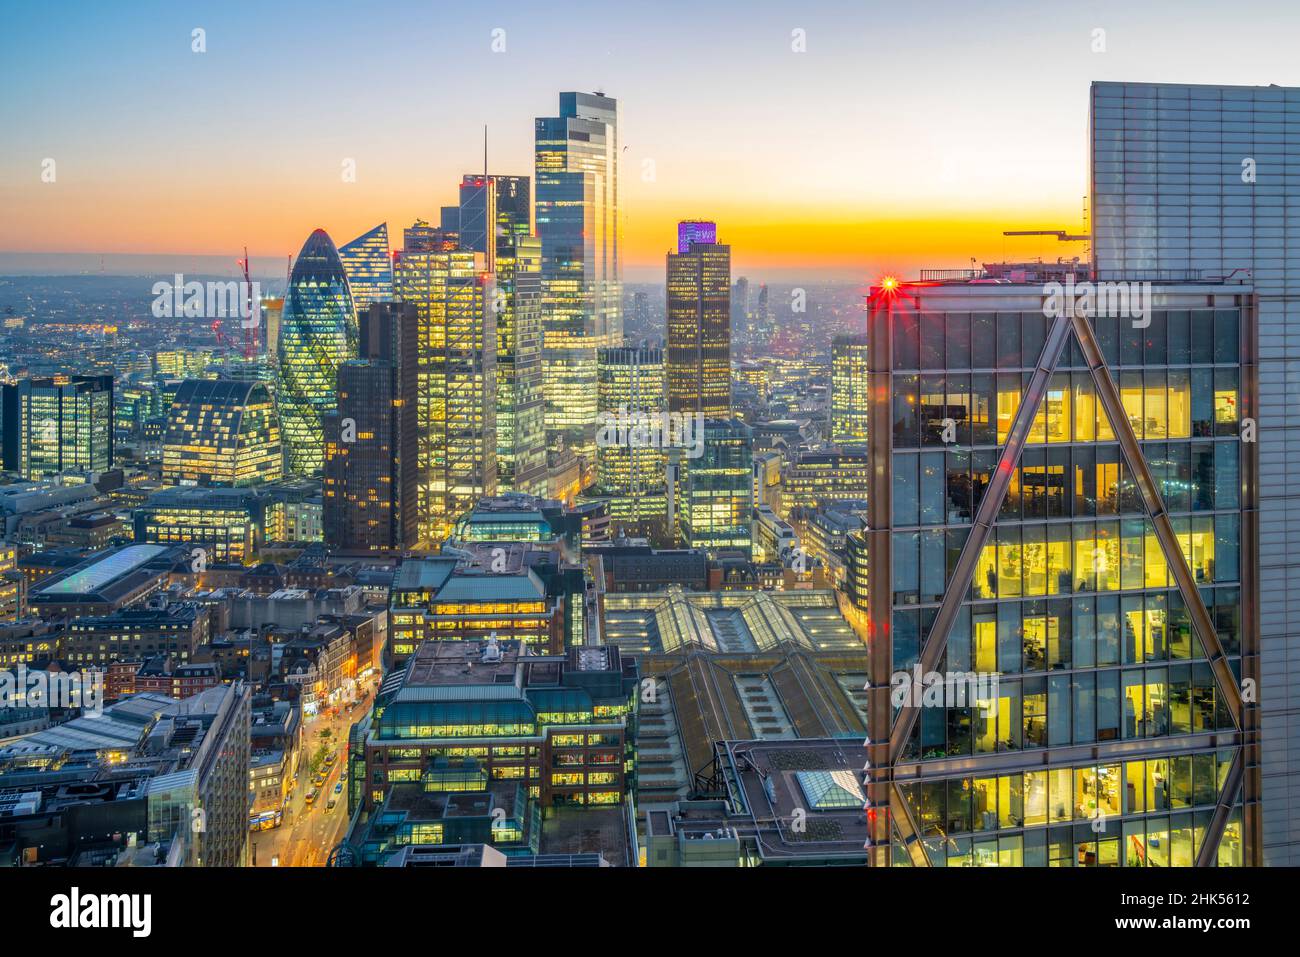 View of City of London skyscrapers at dusk from the Principal Tower, London, England, United Kingdom, Europe Stock Photo